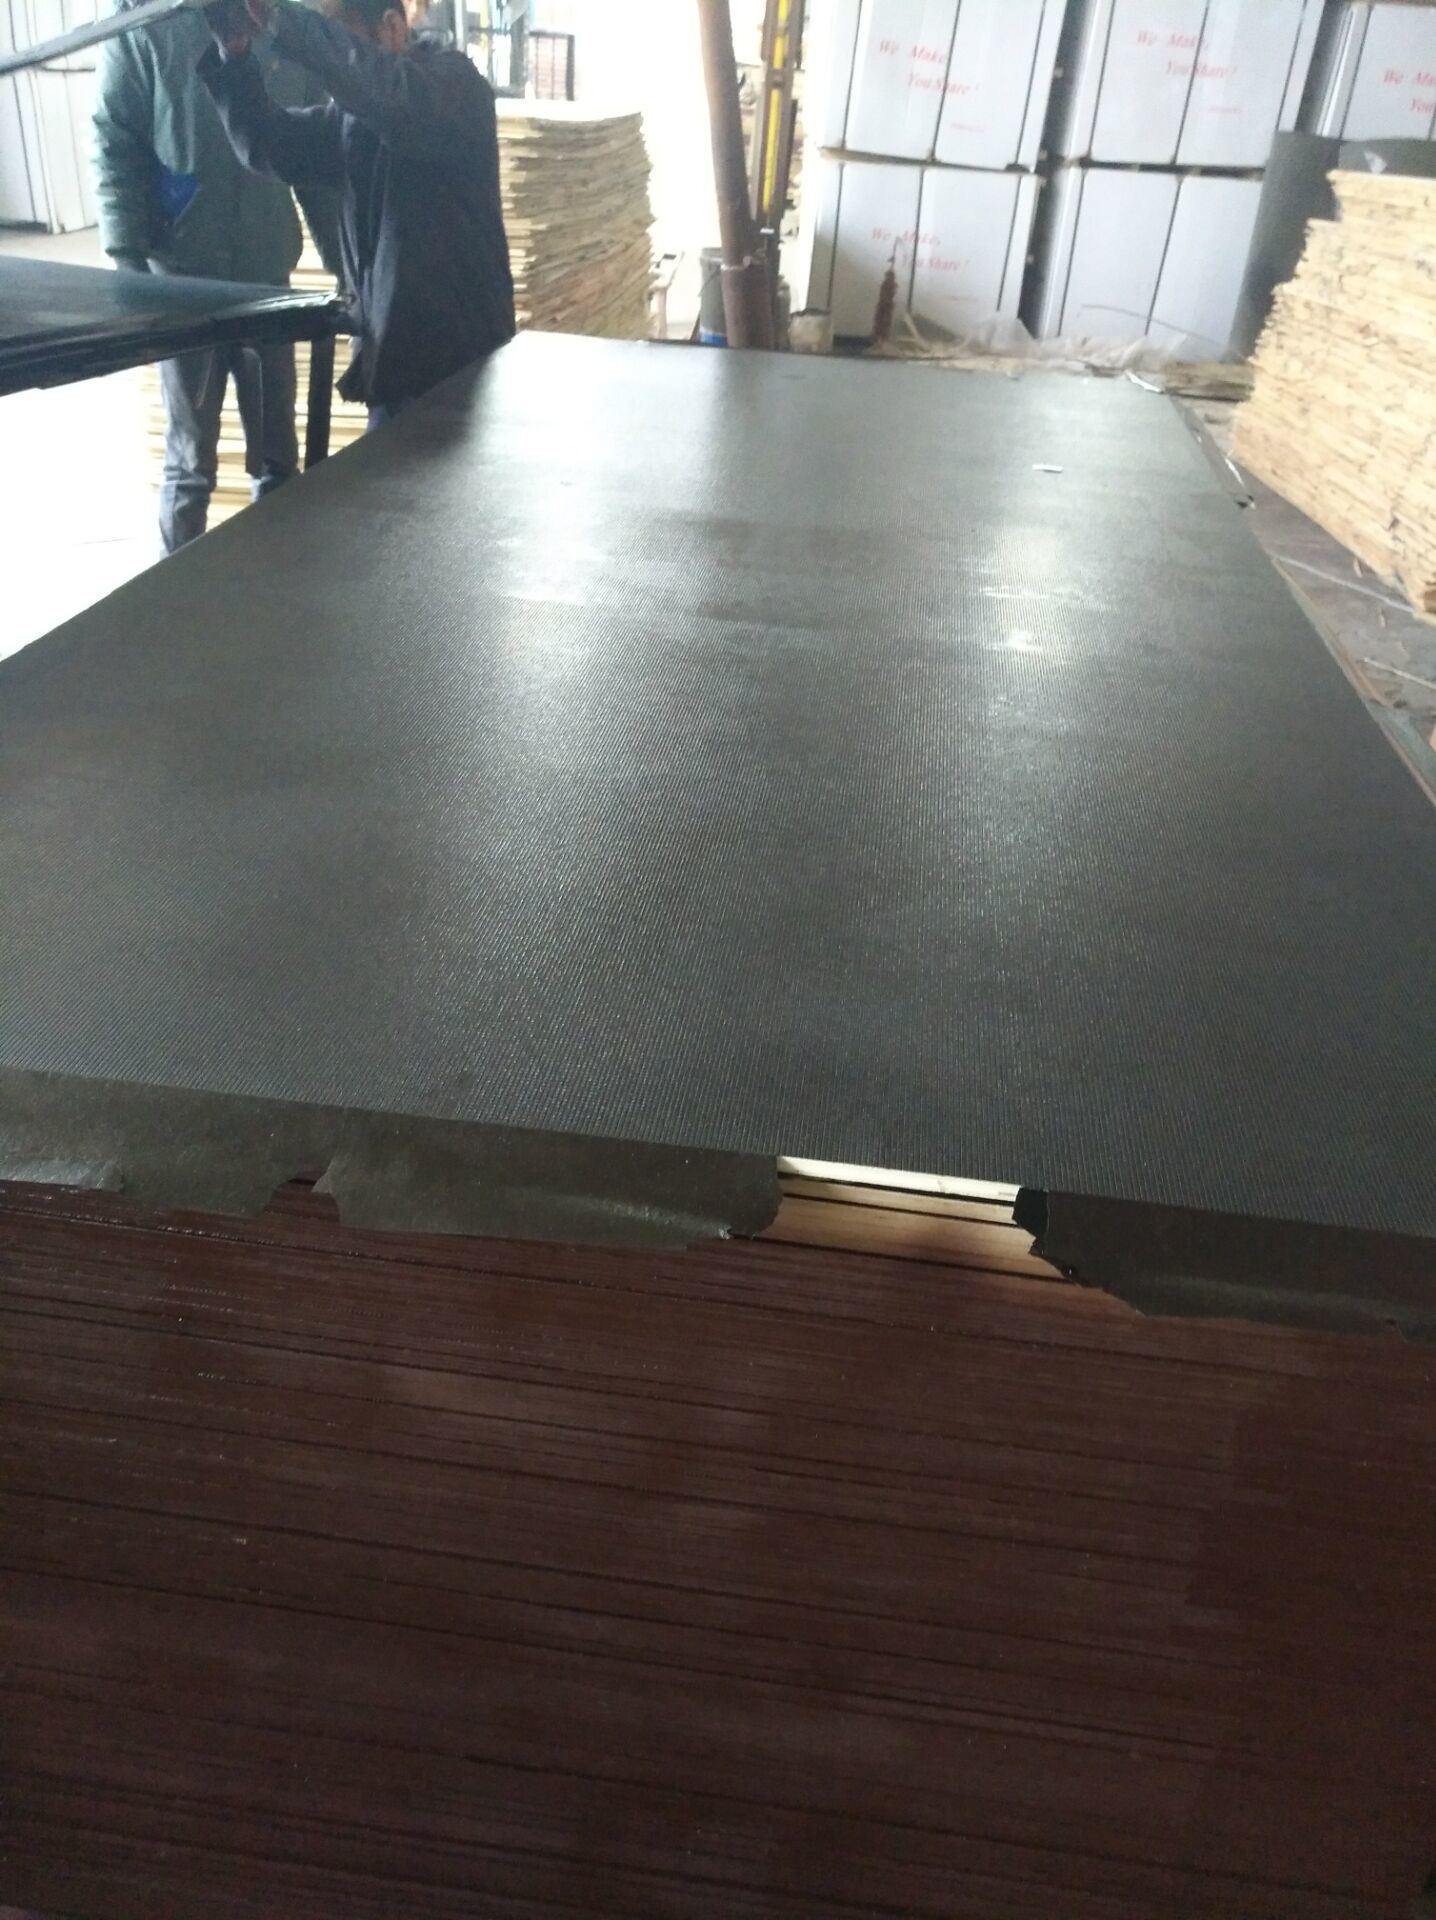 2017 Hot Sale Film Faced Plywood for Constrcution/Concrete Formwork